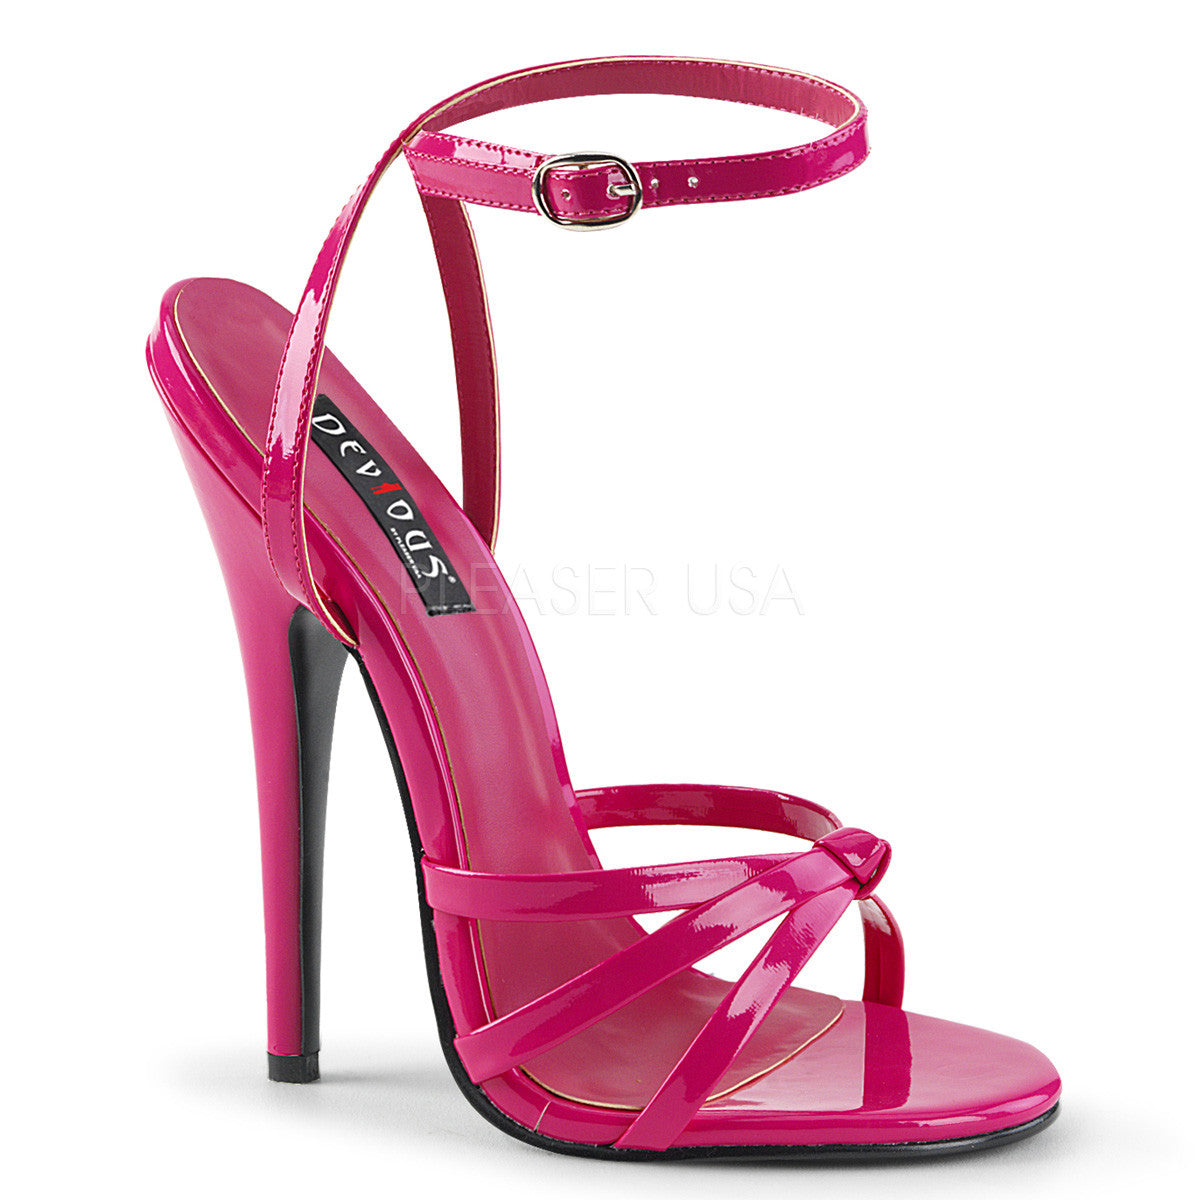 6" Stiletto Heel Hot Pink Pat Wrap Around Knotted Strap Sandal